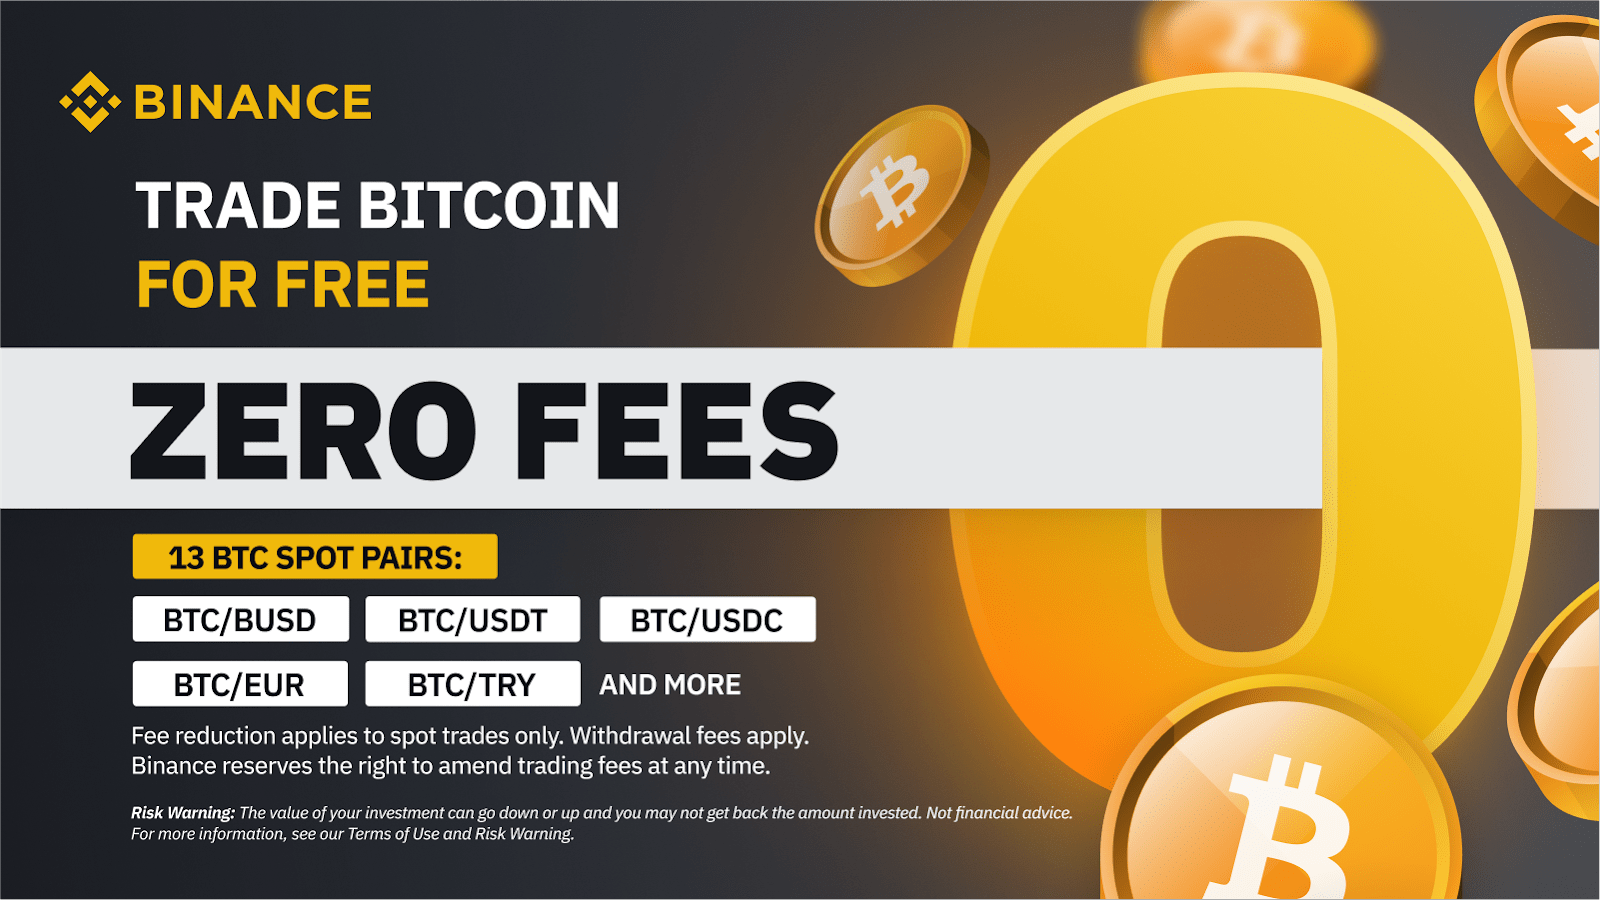 All about transaction fees in Electrum – Bitcoin Electrum